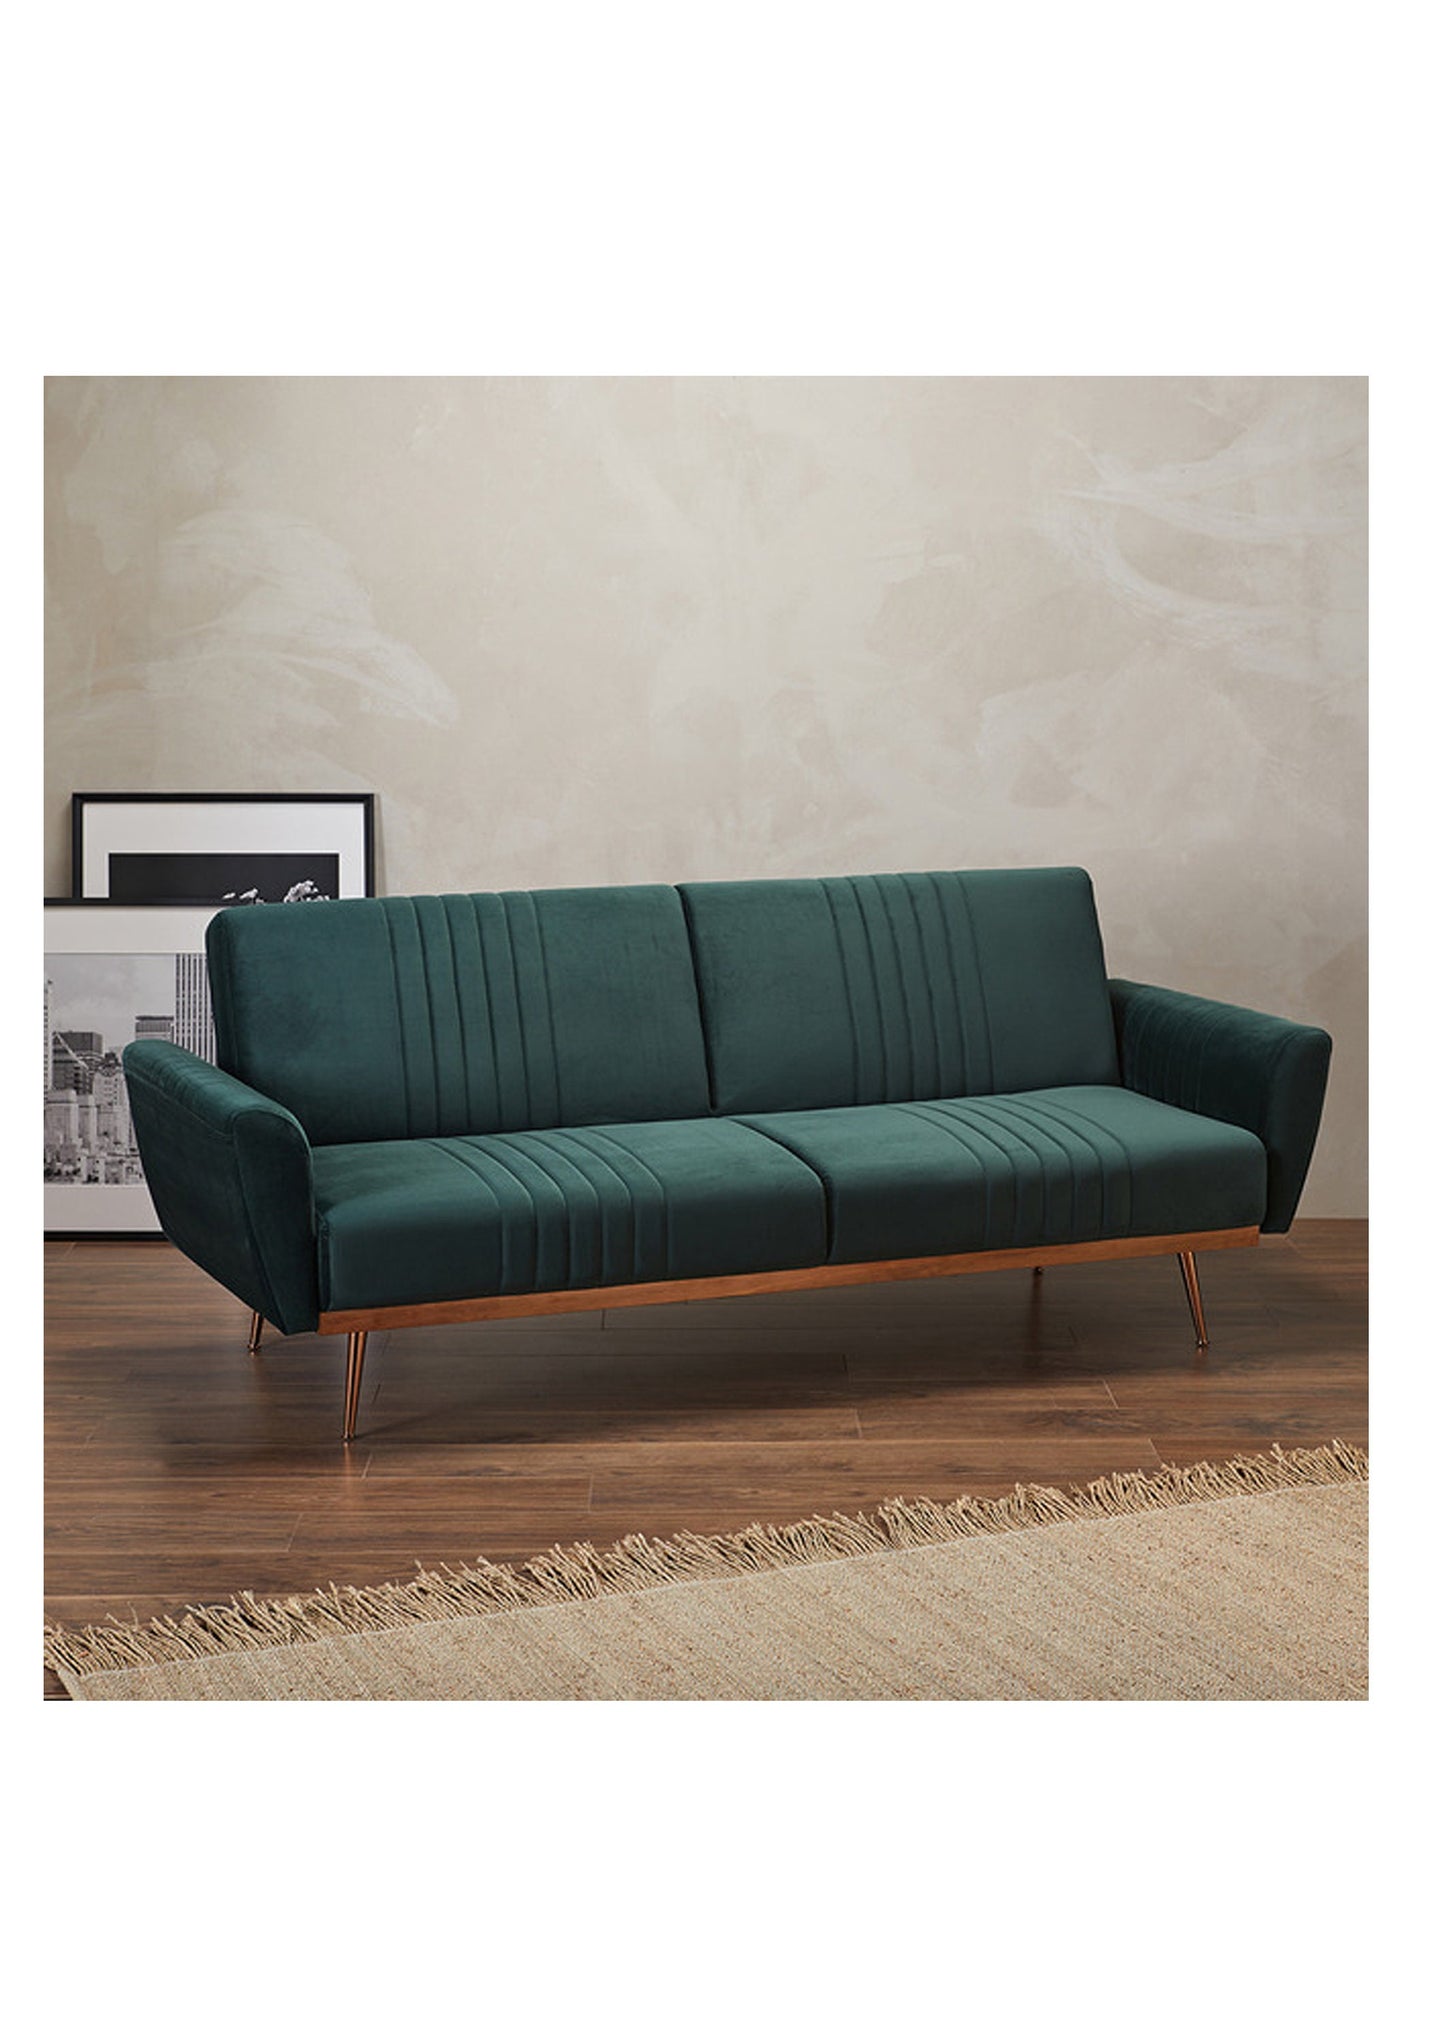 Velvet Sofa Bed with Copper Legs Available in Green and Grey